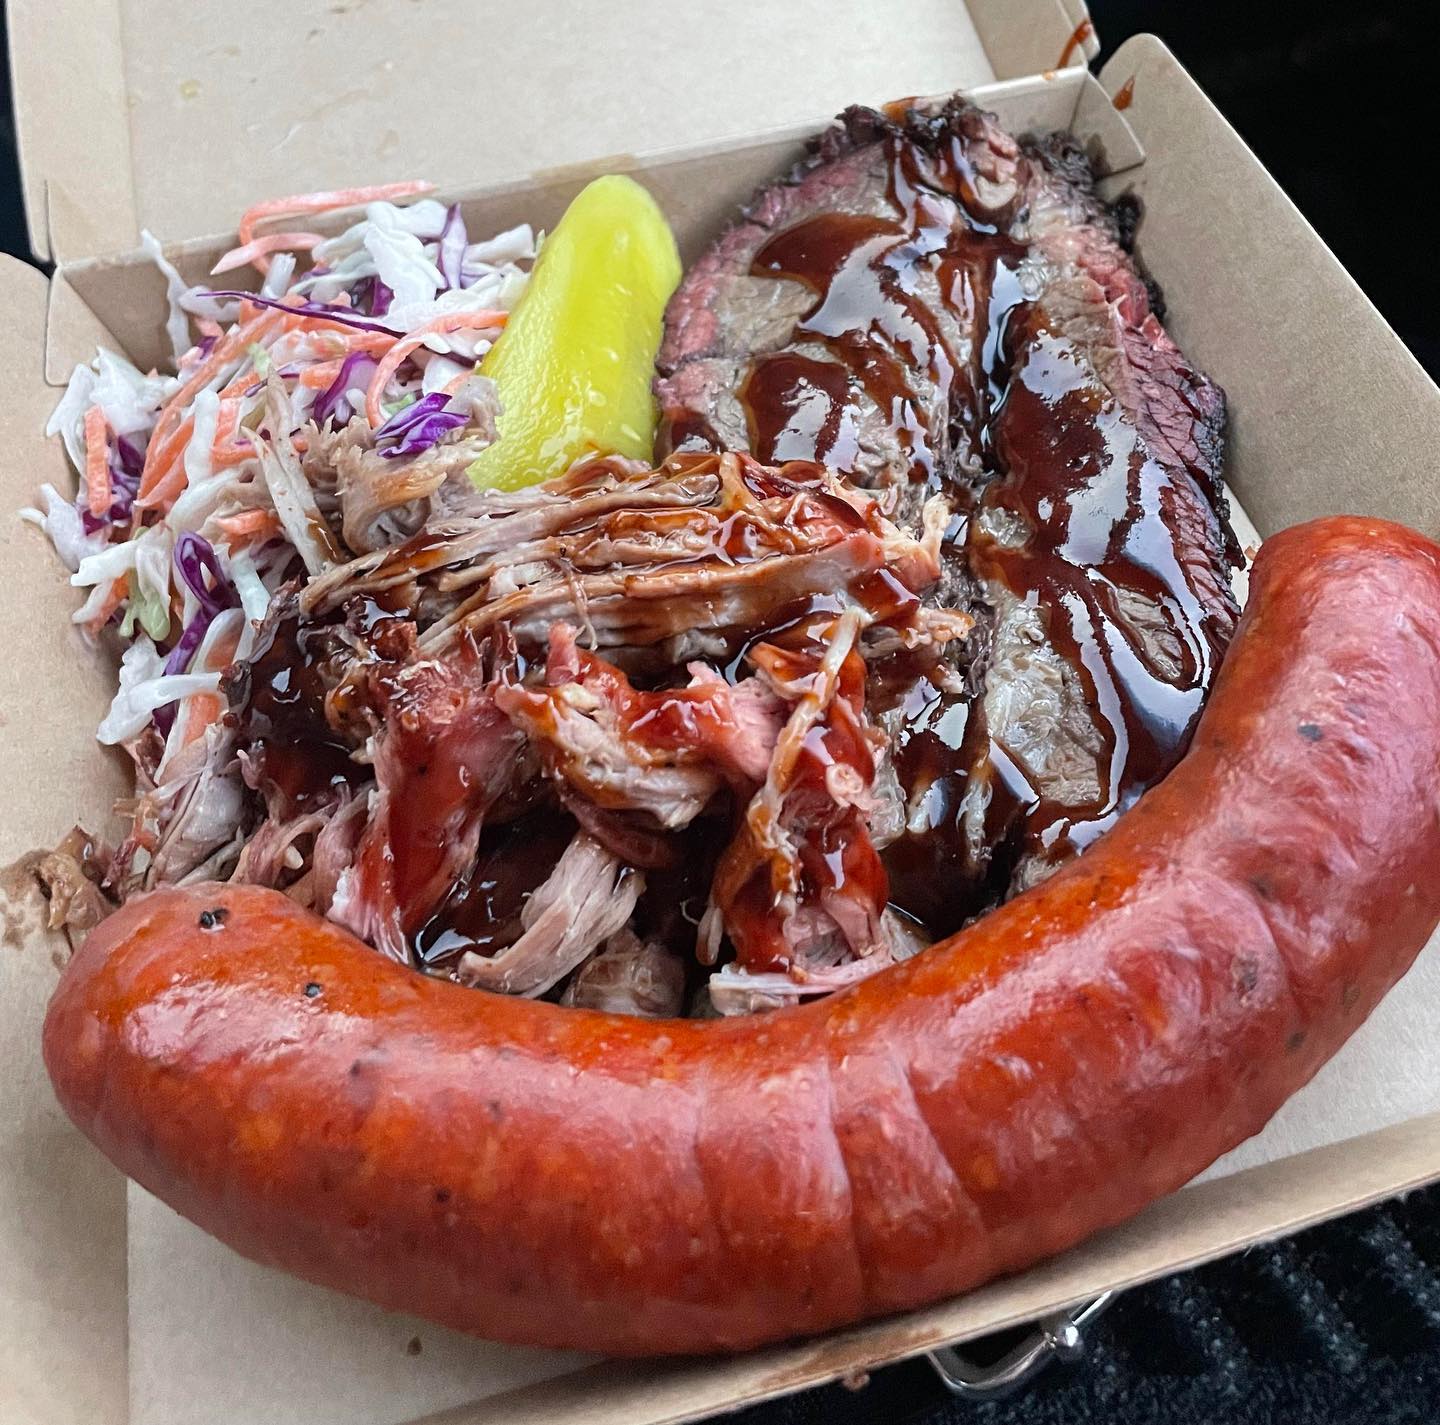 Food Truck meal of a range of meats from Fractured Wood BBQ Australia